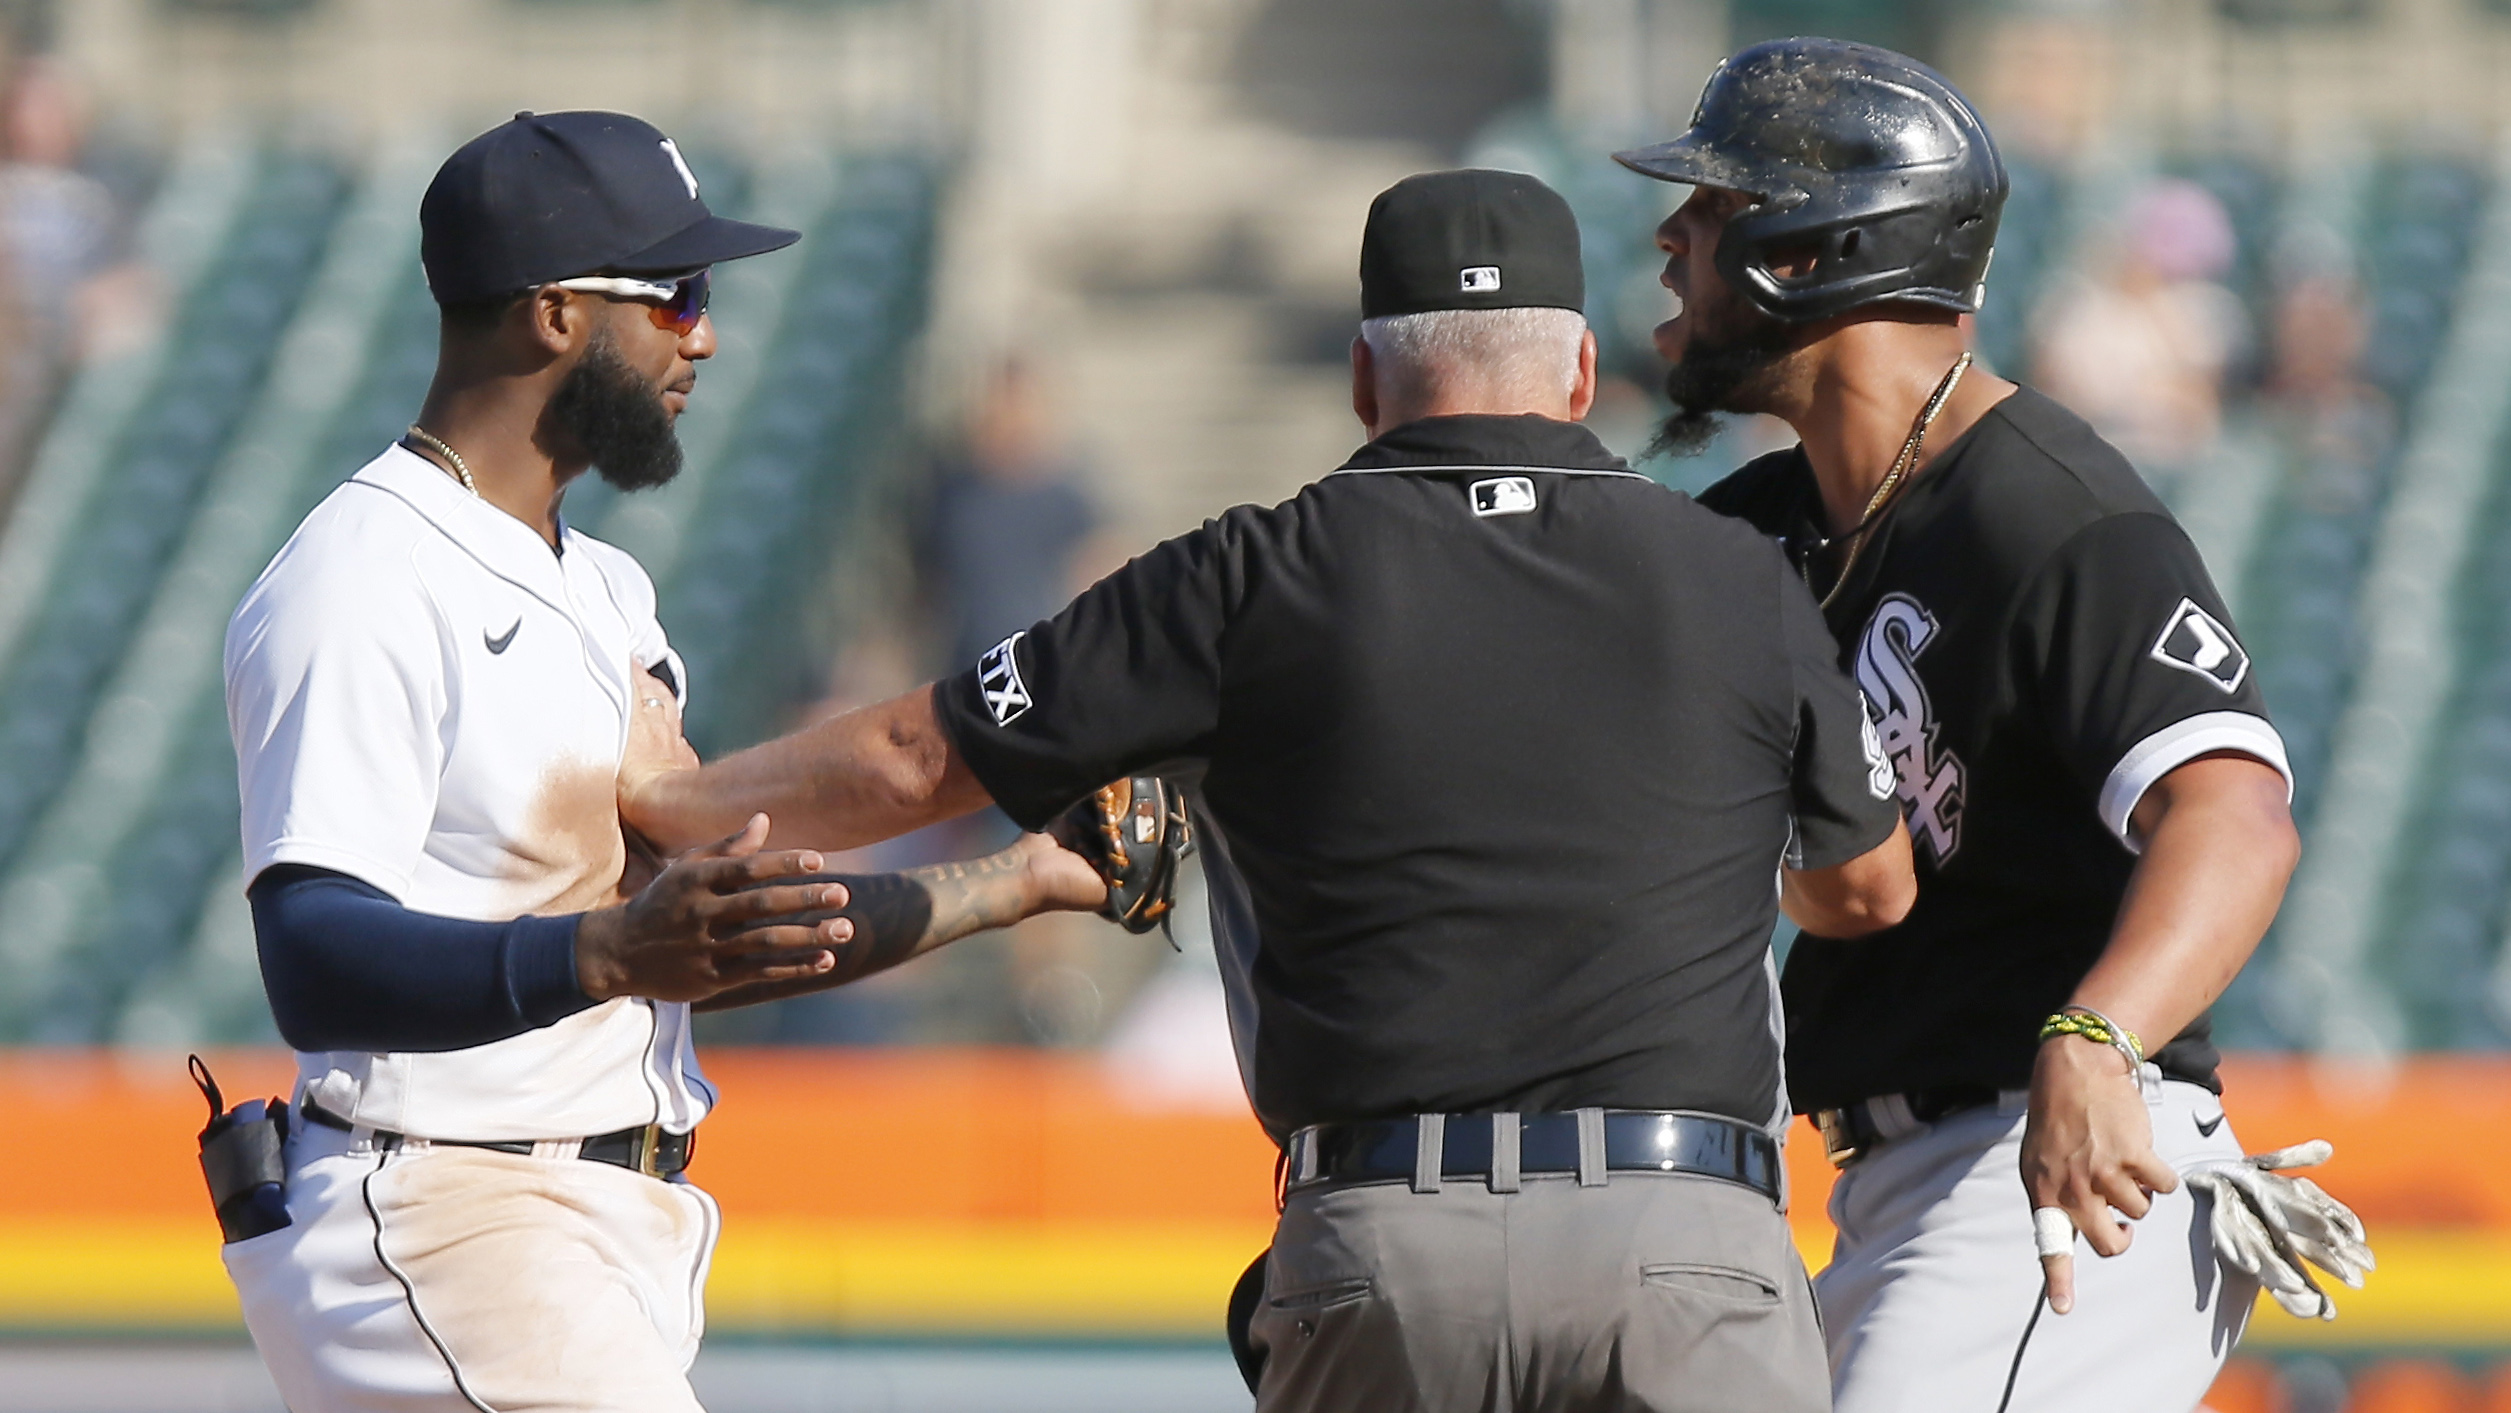 White Sox vs Tigers fight Jose Abreu slide causes benches to clear